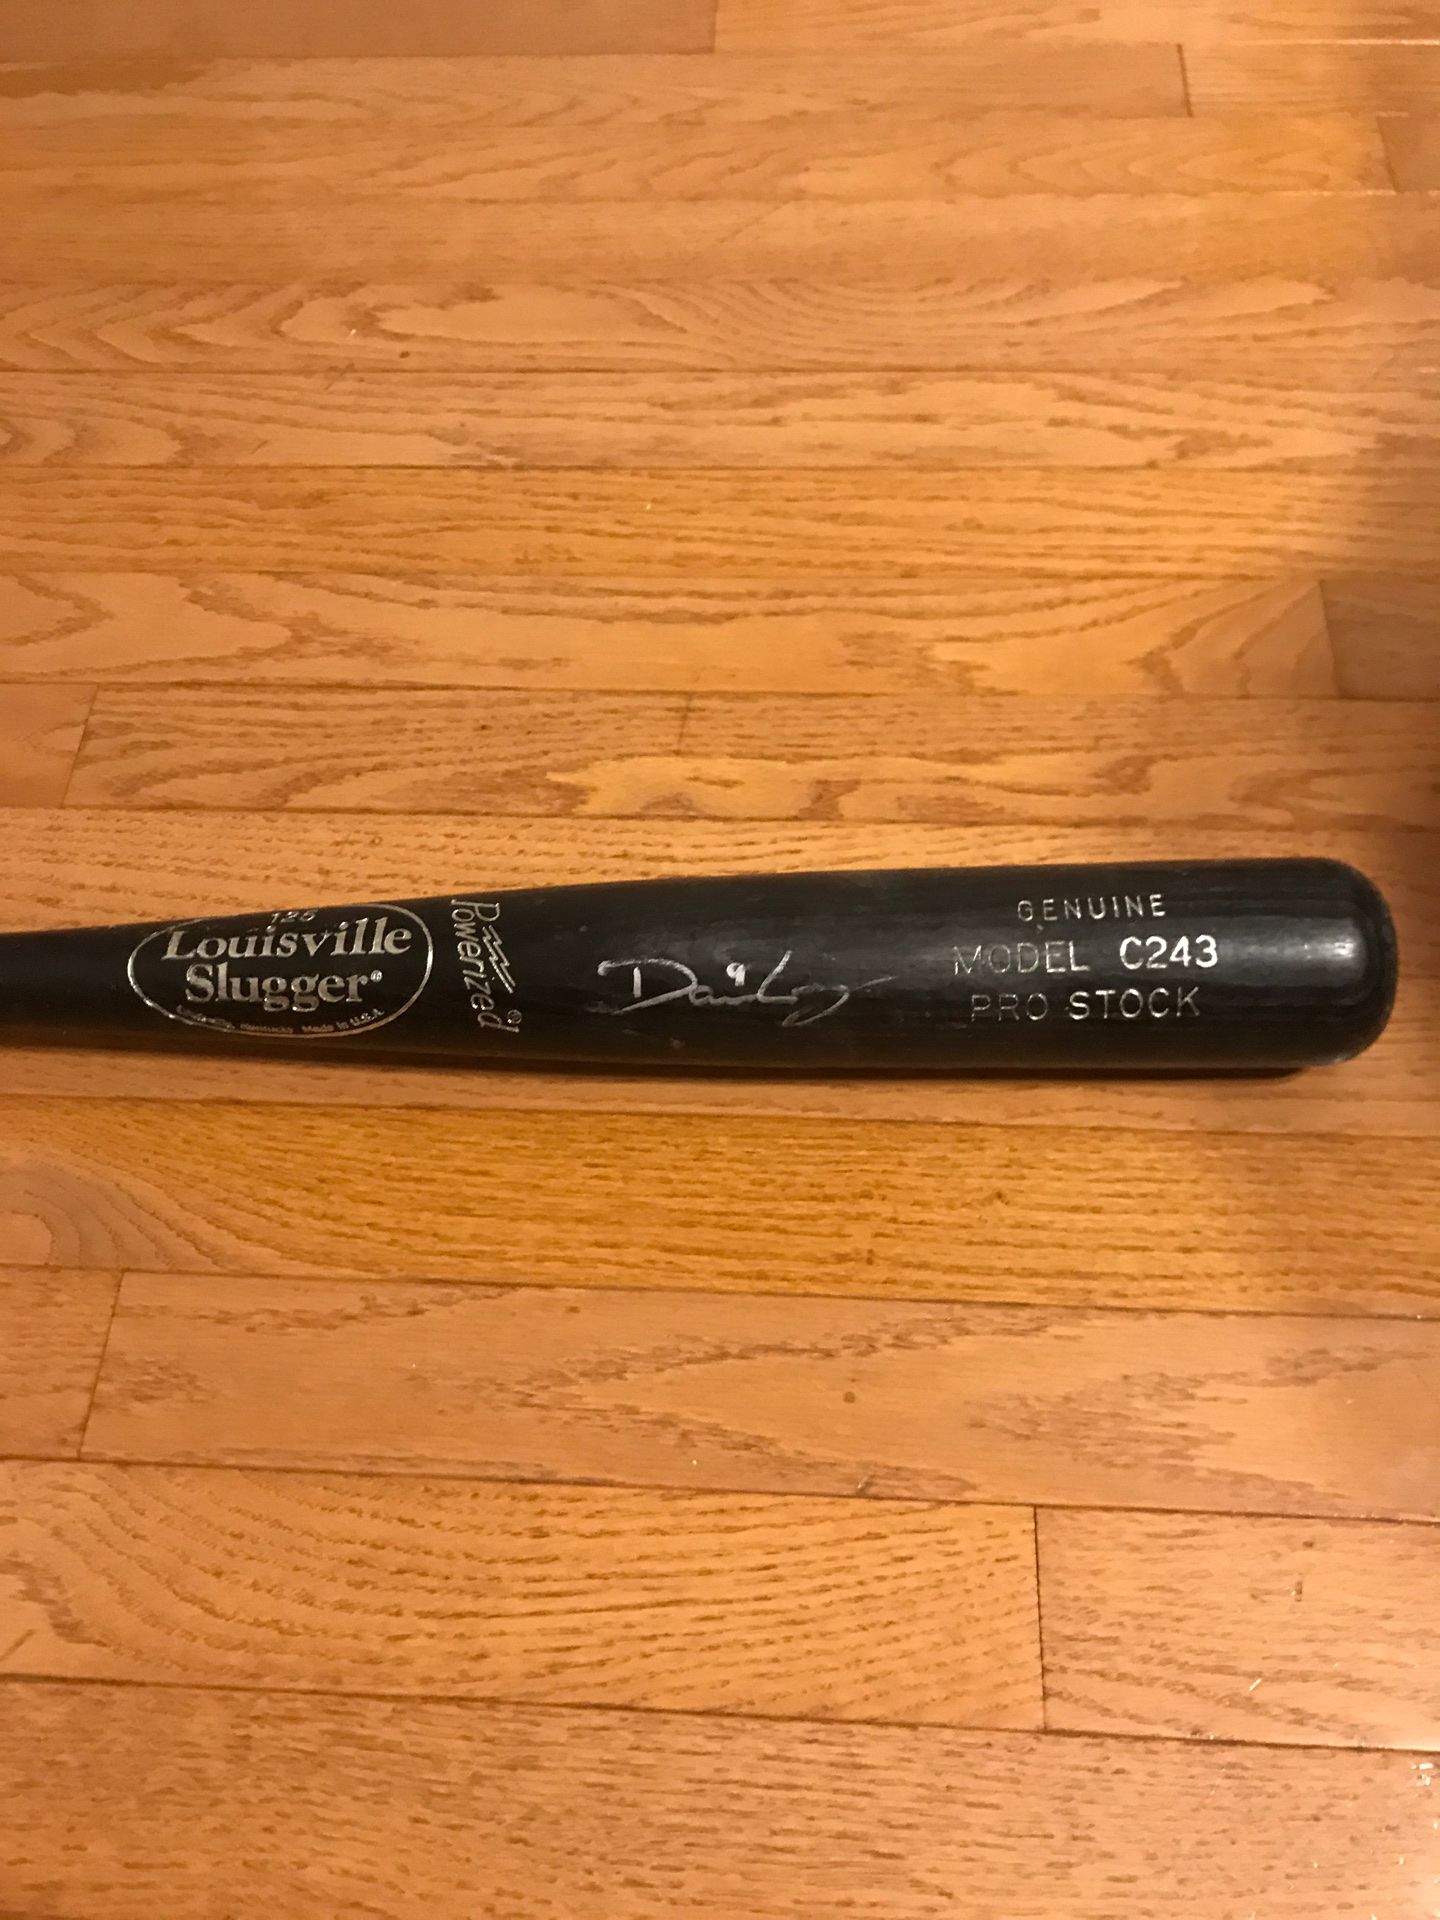 Game Used Louisville Slugger Baseball Bat Autographed Signed by Dan Lyons of the Potomac Nationals